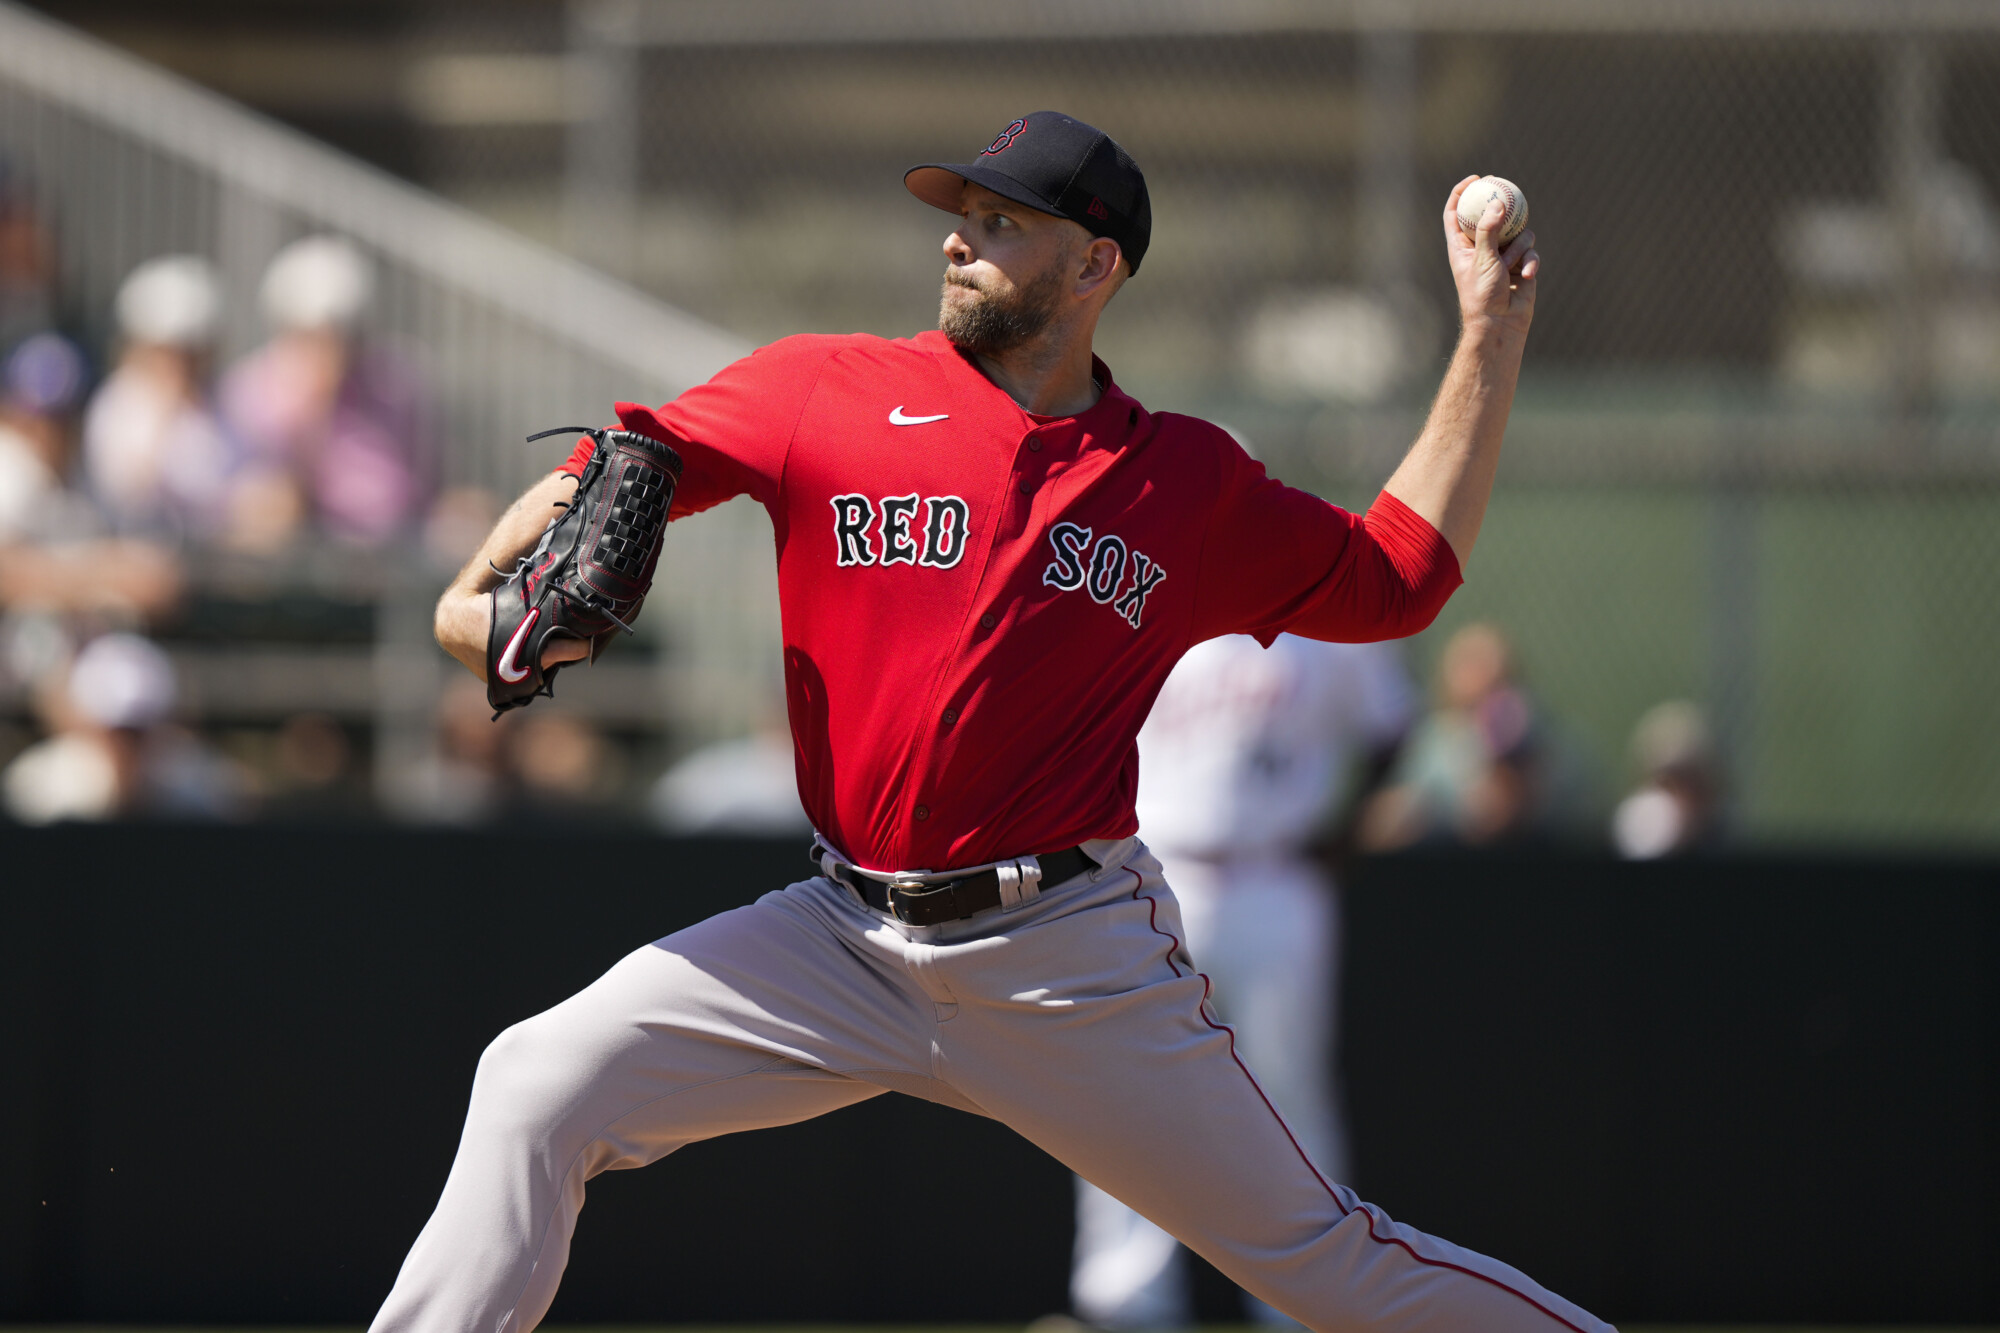 RED SOX NOTEBOOK: Several starters sit as team preps for Texas series